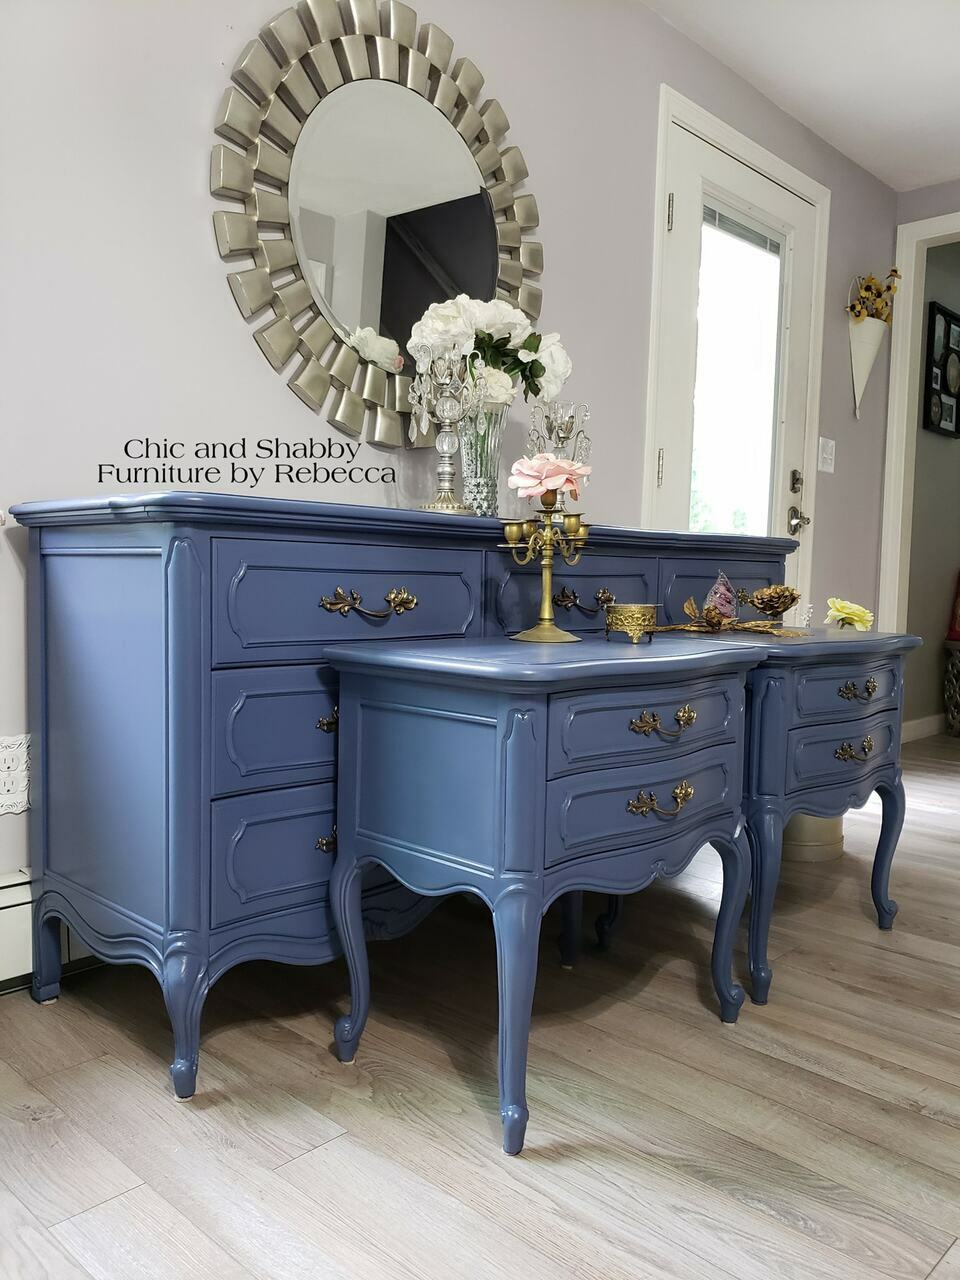 Yankee Blue Dixie Belle Chalk Mineral Paint - Same Day Shipping - No VOC - Chalk Paint for Furniture and Cabinets - Water Based Paint - belleandbeau850